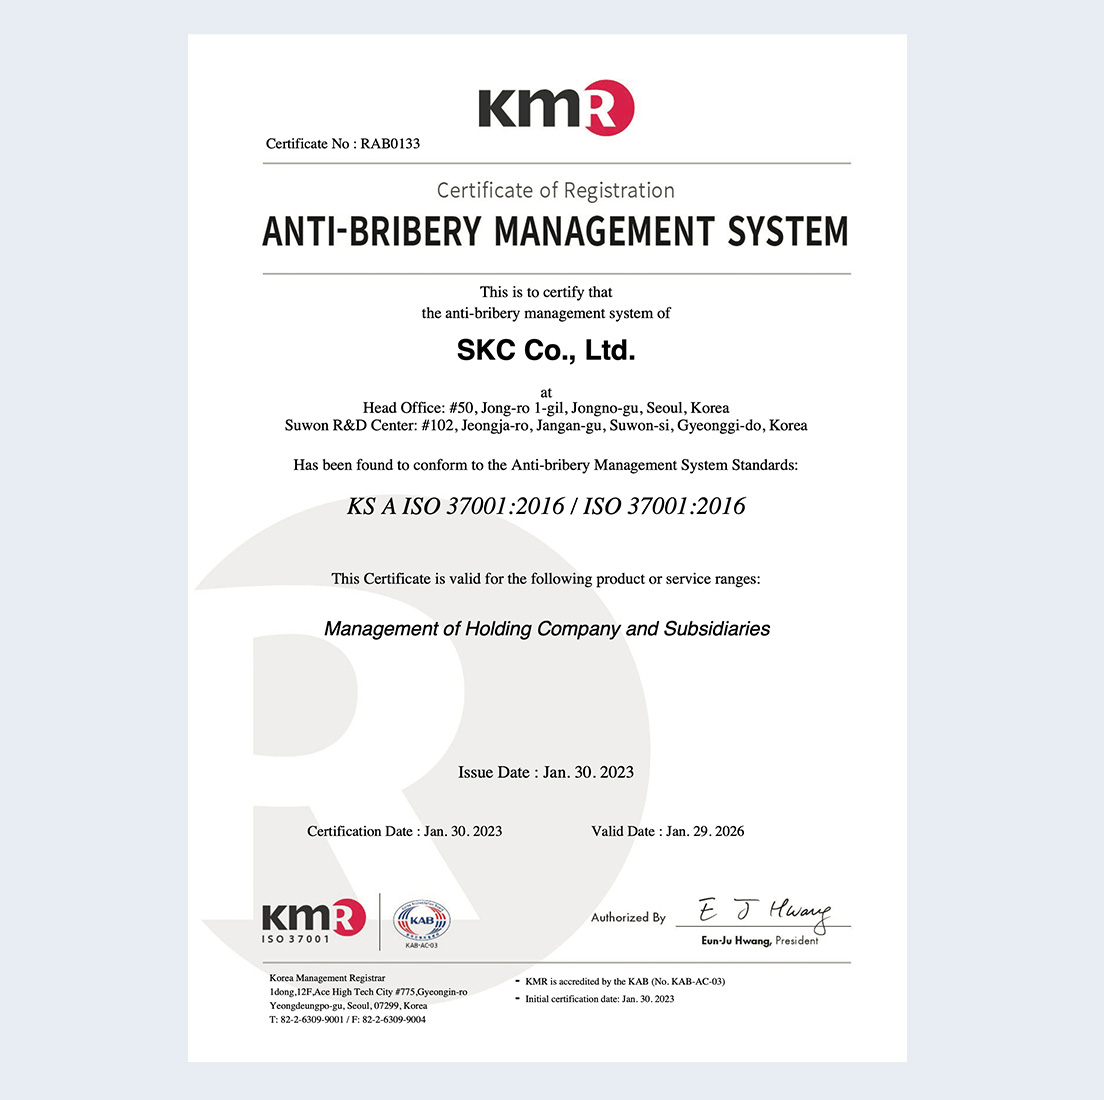 ISO 37001 (Anti-bribery management system) Certification